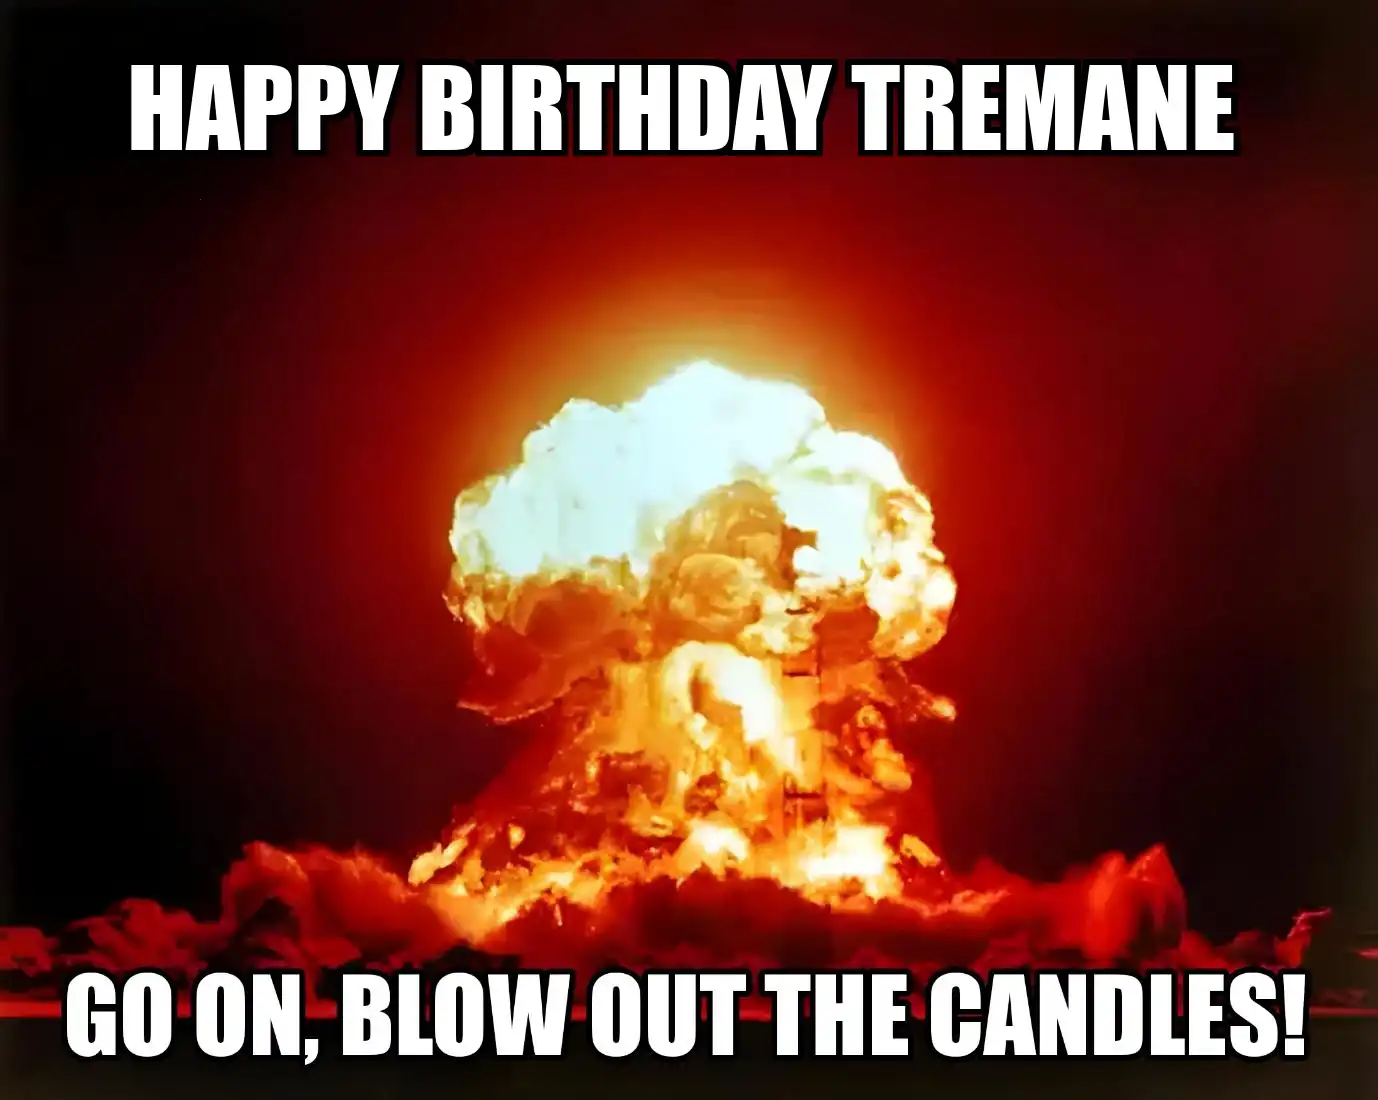 Happy Birthday Tremane Go On Blow Out The Candles Meme